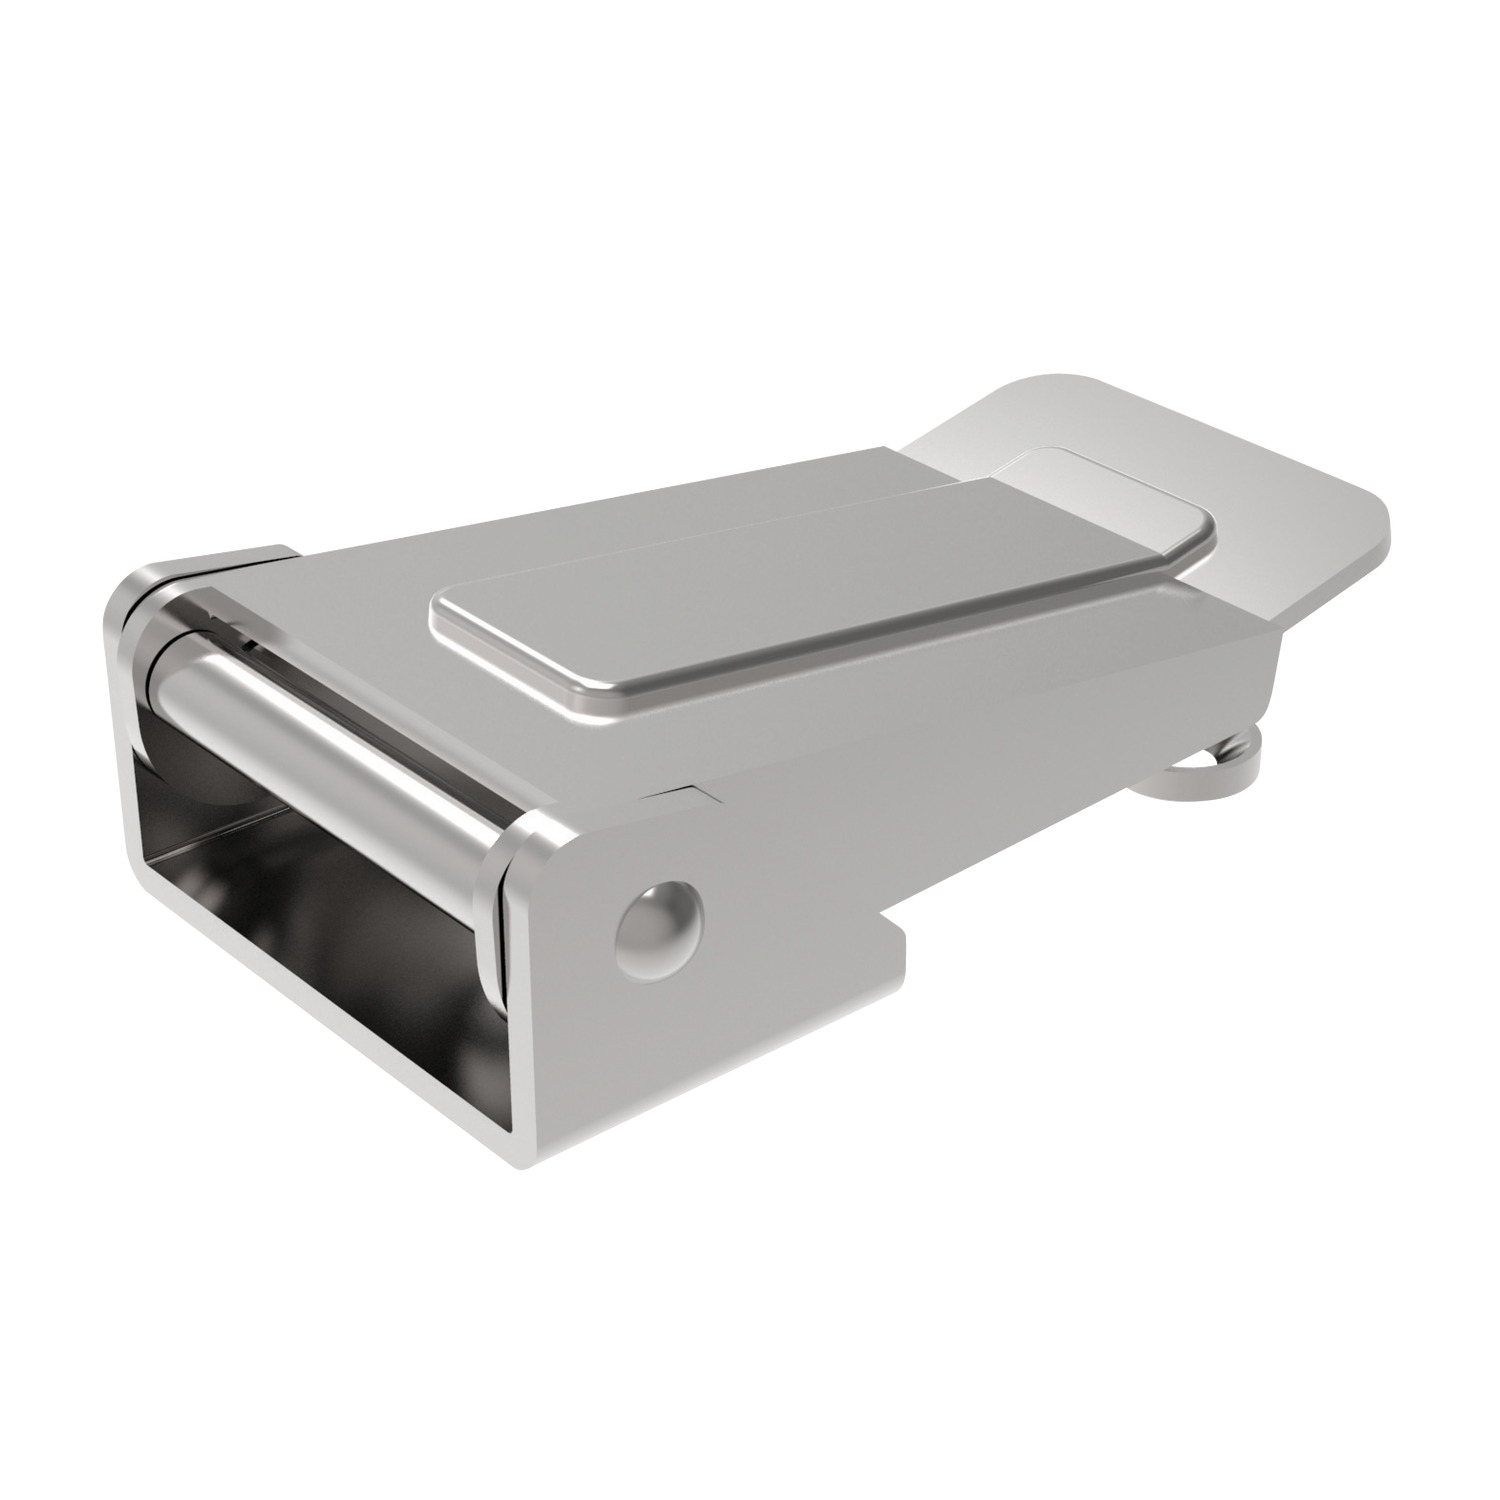 Toggle Latches A simple, adjustable latch design that has 12mm of adjustment available through use of threaded draw rod. Steel or stainless steel version available.